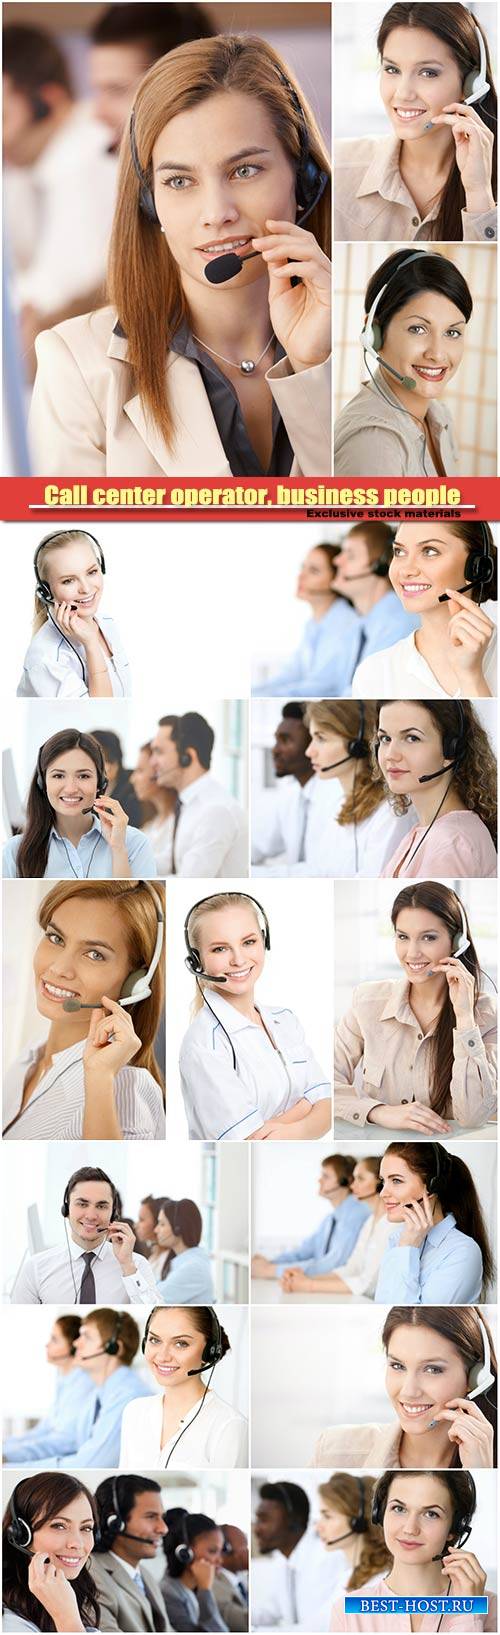 Call center operator, business people